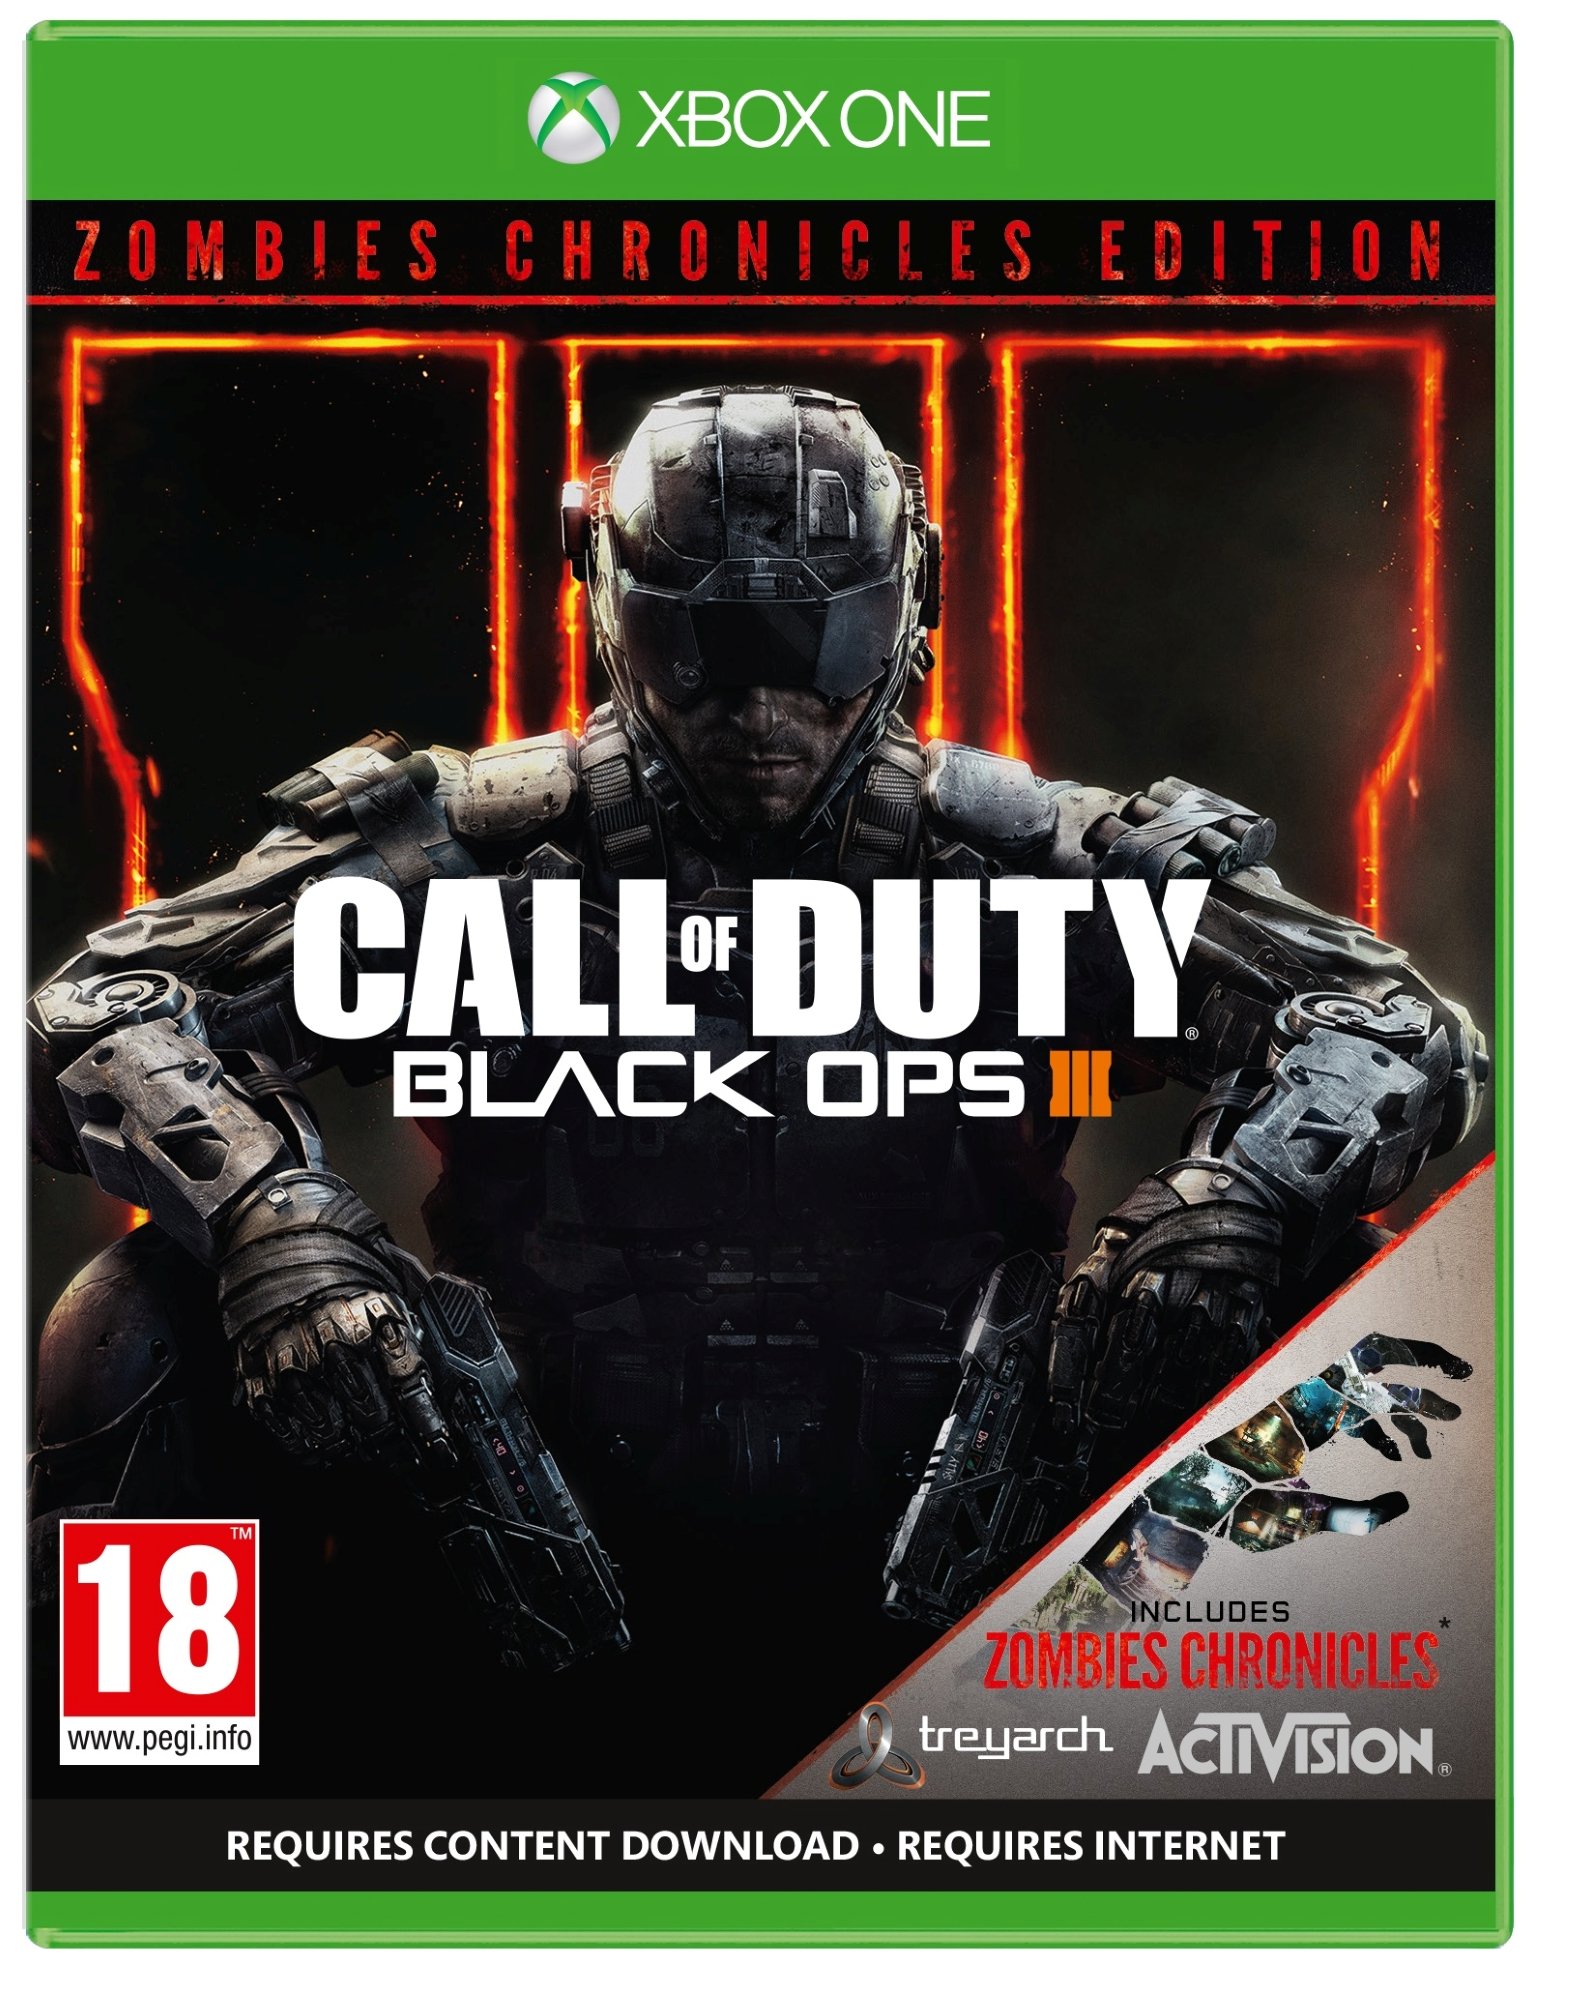 call of duty black ops 3 zombie chronicles edition gameplay